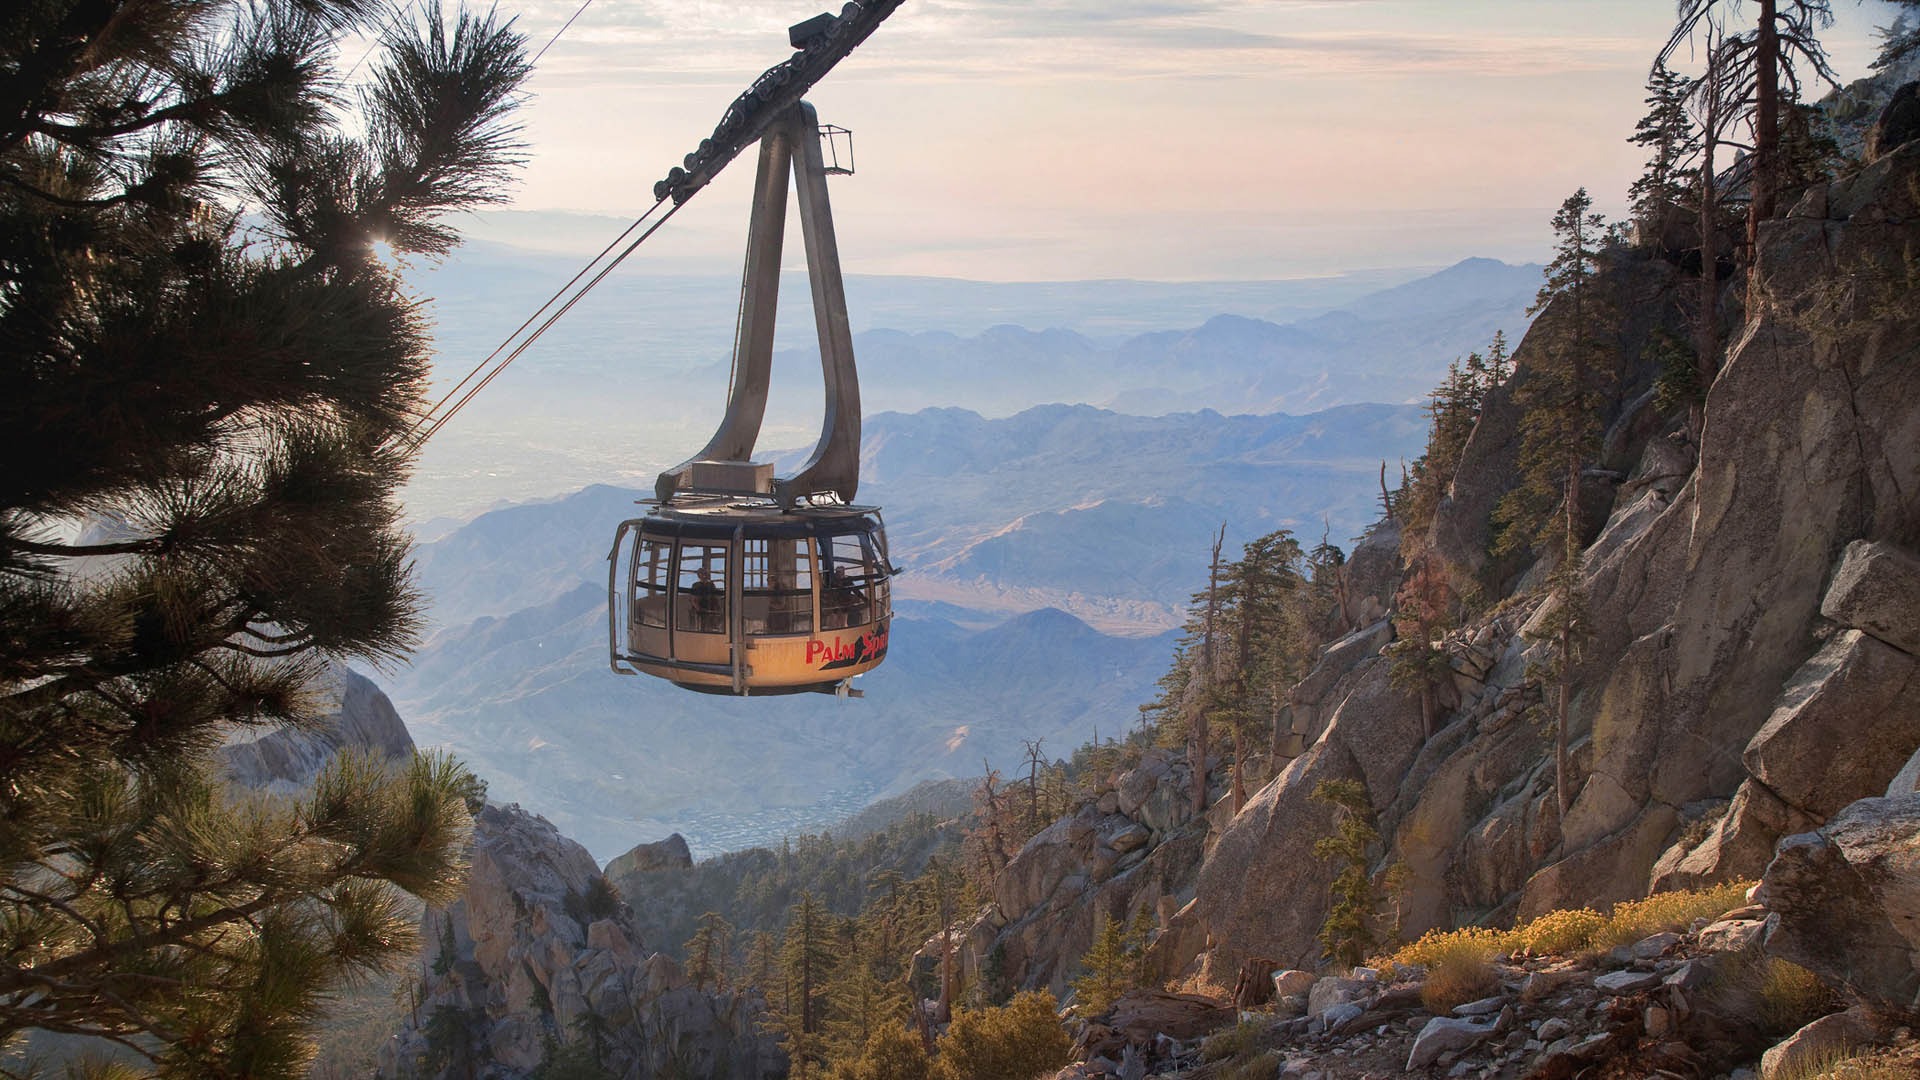 Aerial Tramway, Local area, Haskell real estate, Transportation, 1920x1080 Full HD Desktop